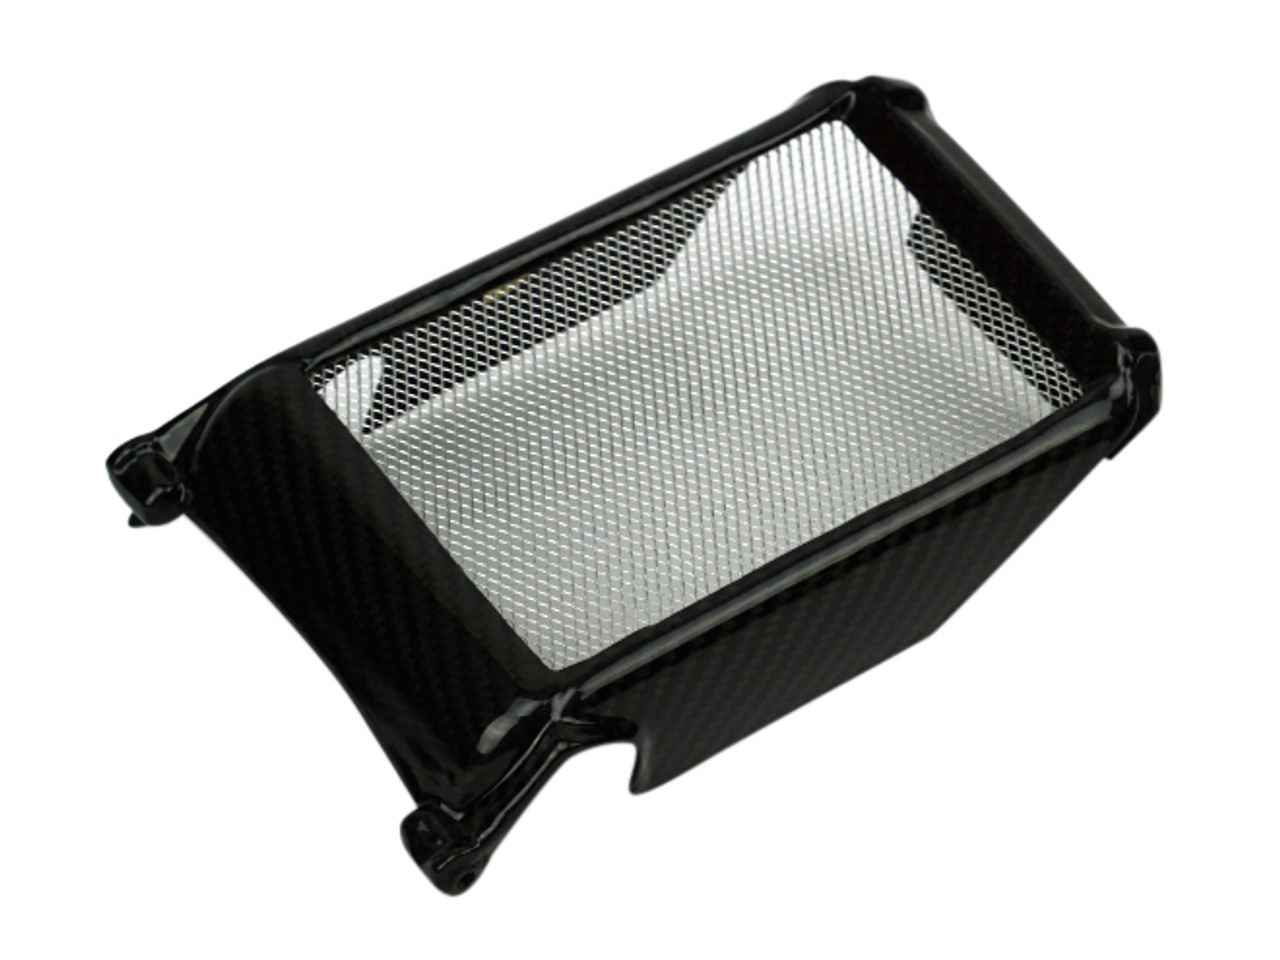 Radiator Cover with Mesh in Glossy Twill Weave Carbon Fiber for Ducati Monster 696, 796, 1100